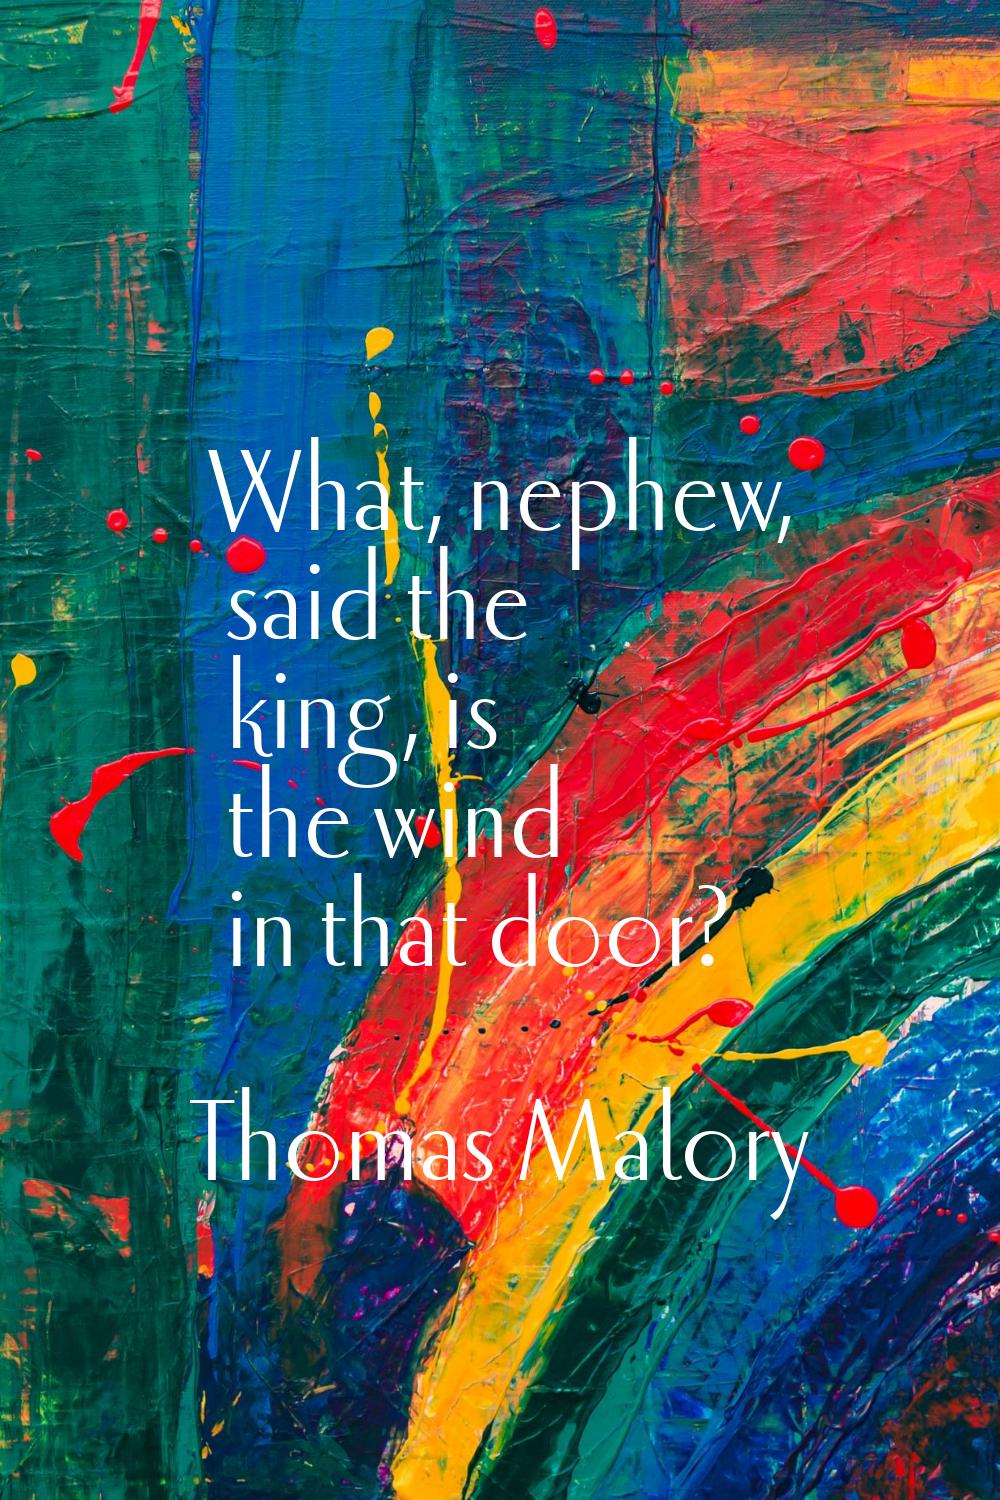 What, nephew, said the king, is the wind in that door?